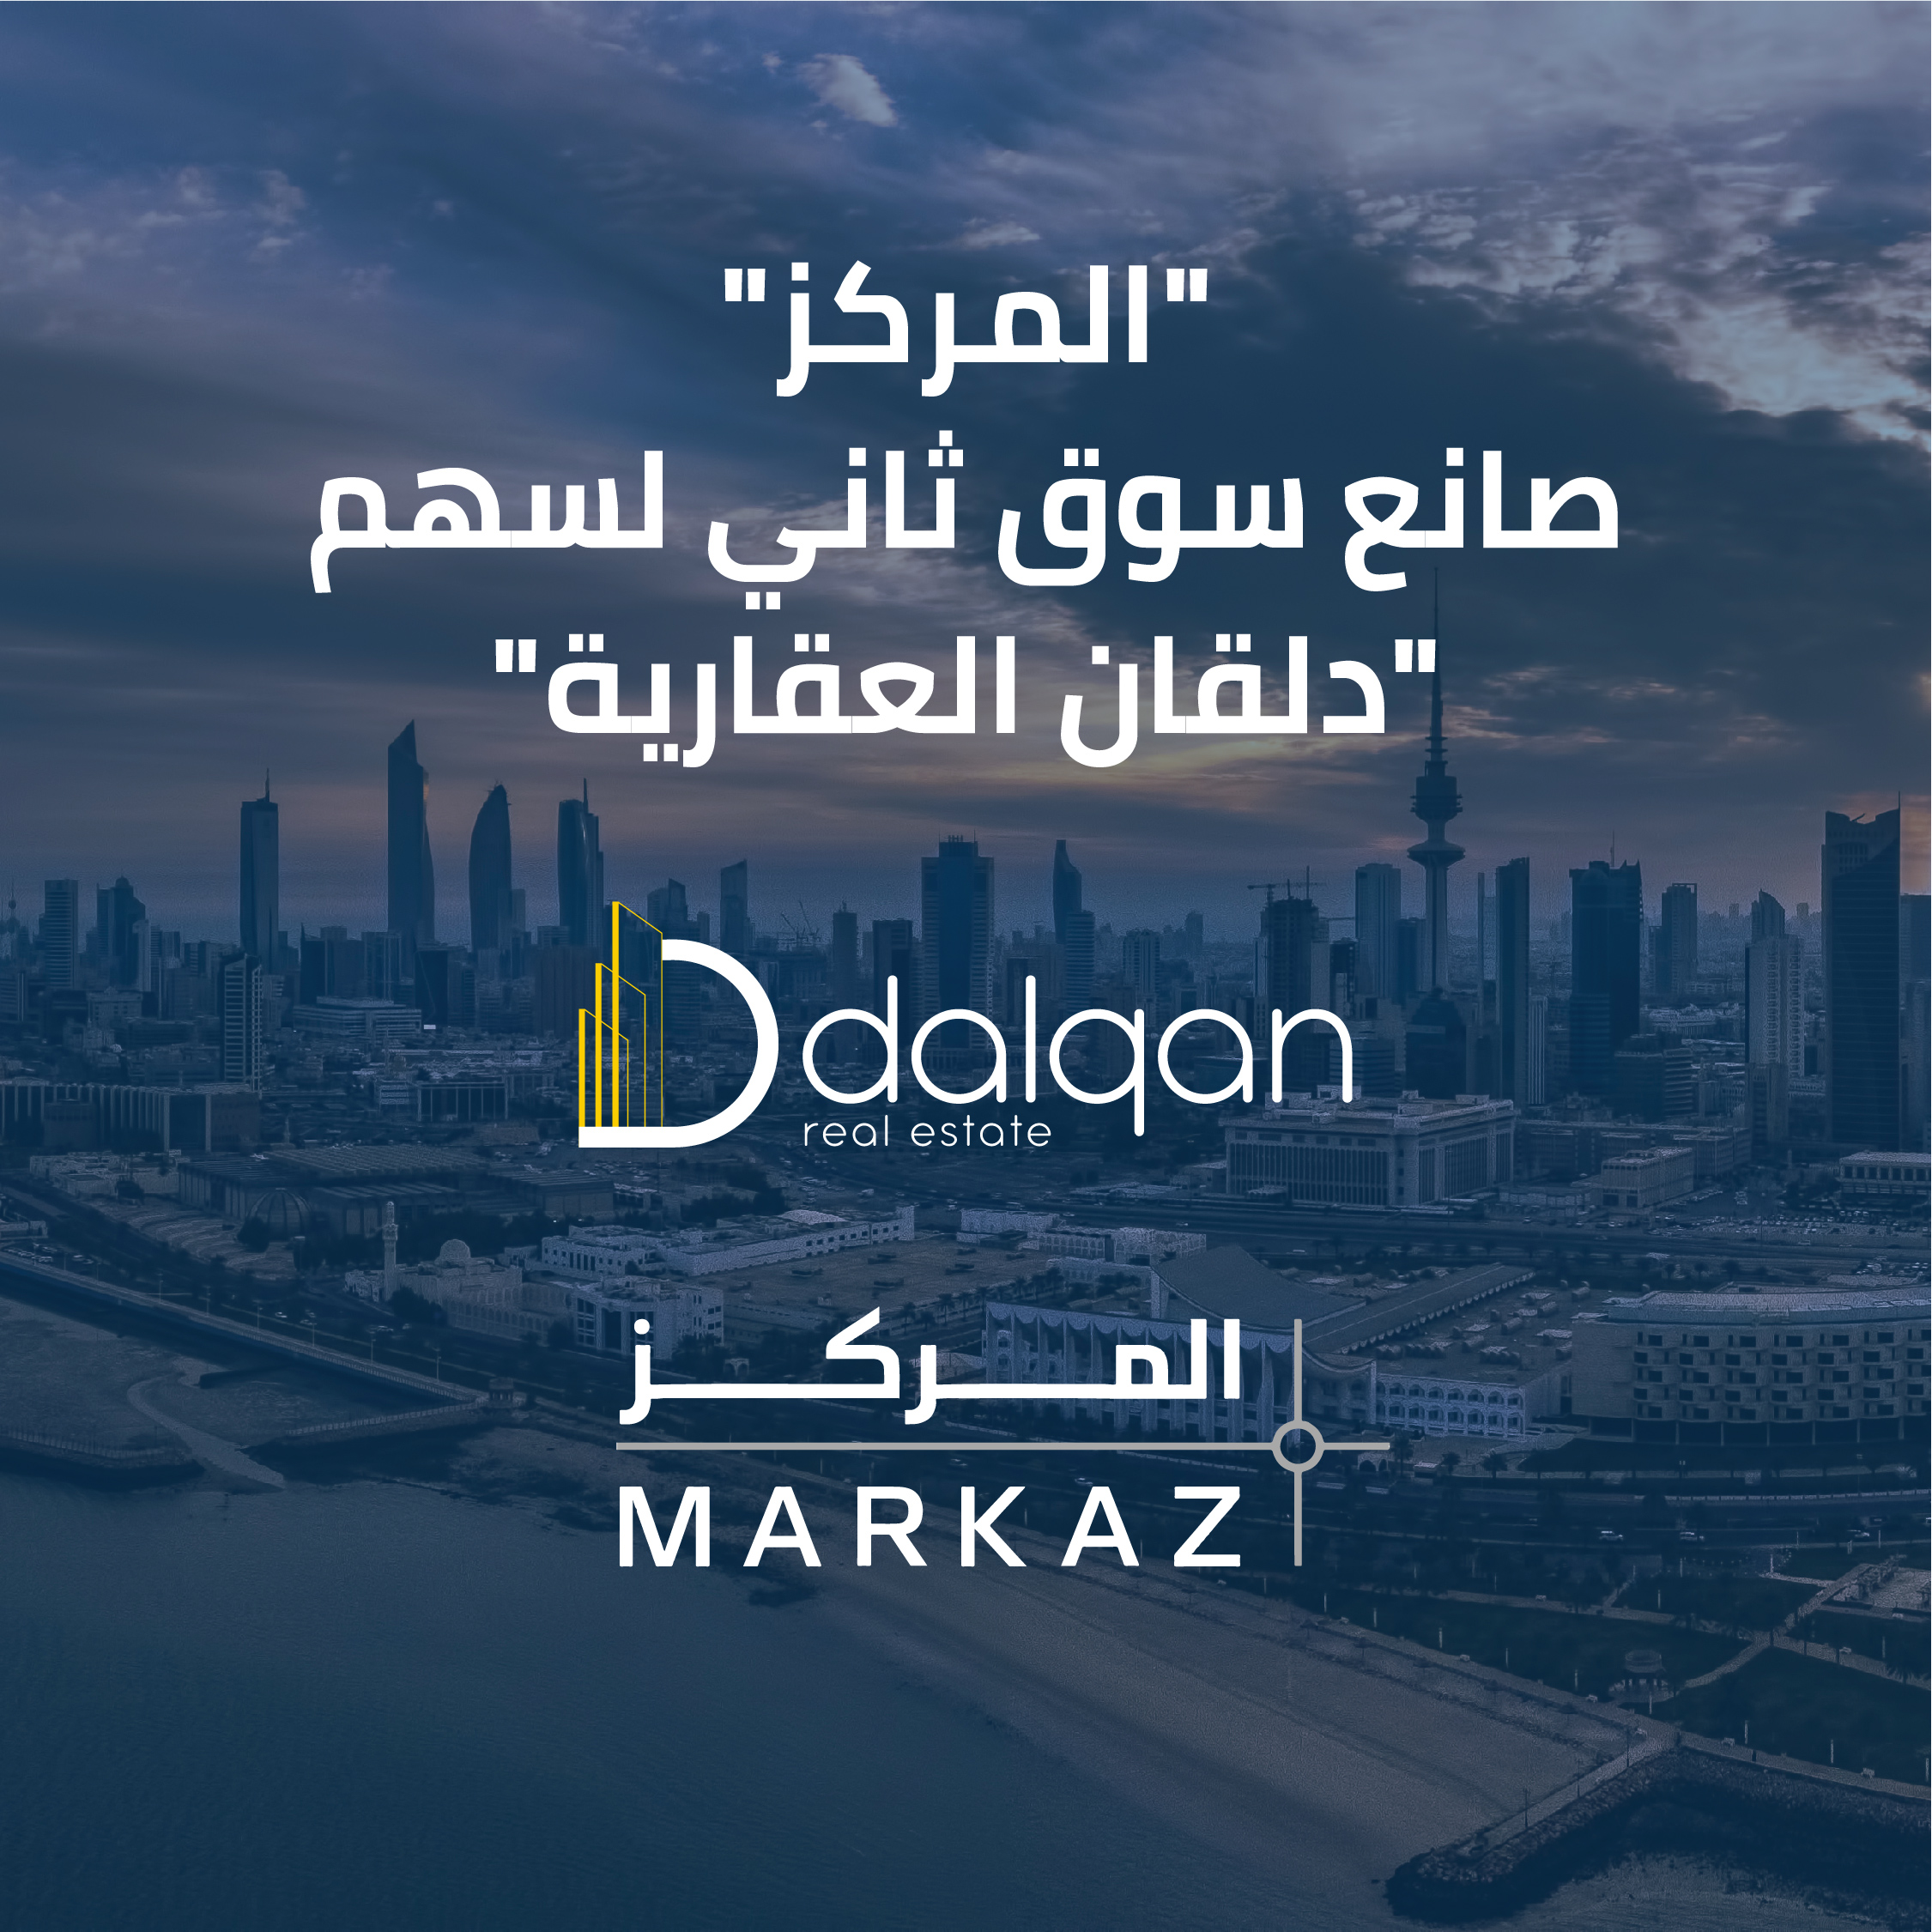 To support its share steady and stable growth, Dalqan Real Estate Company signs with Kuwait Financial Center – Markaz as the second market maker.